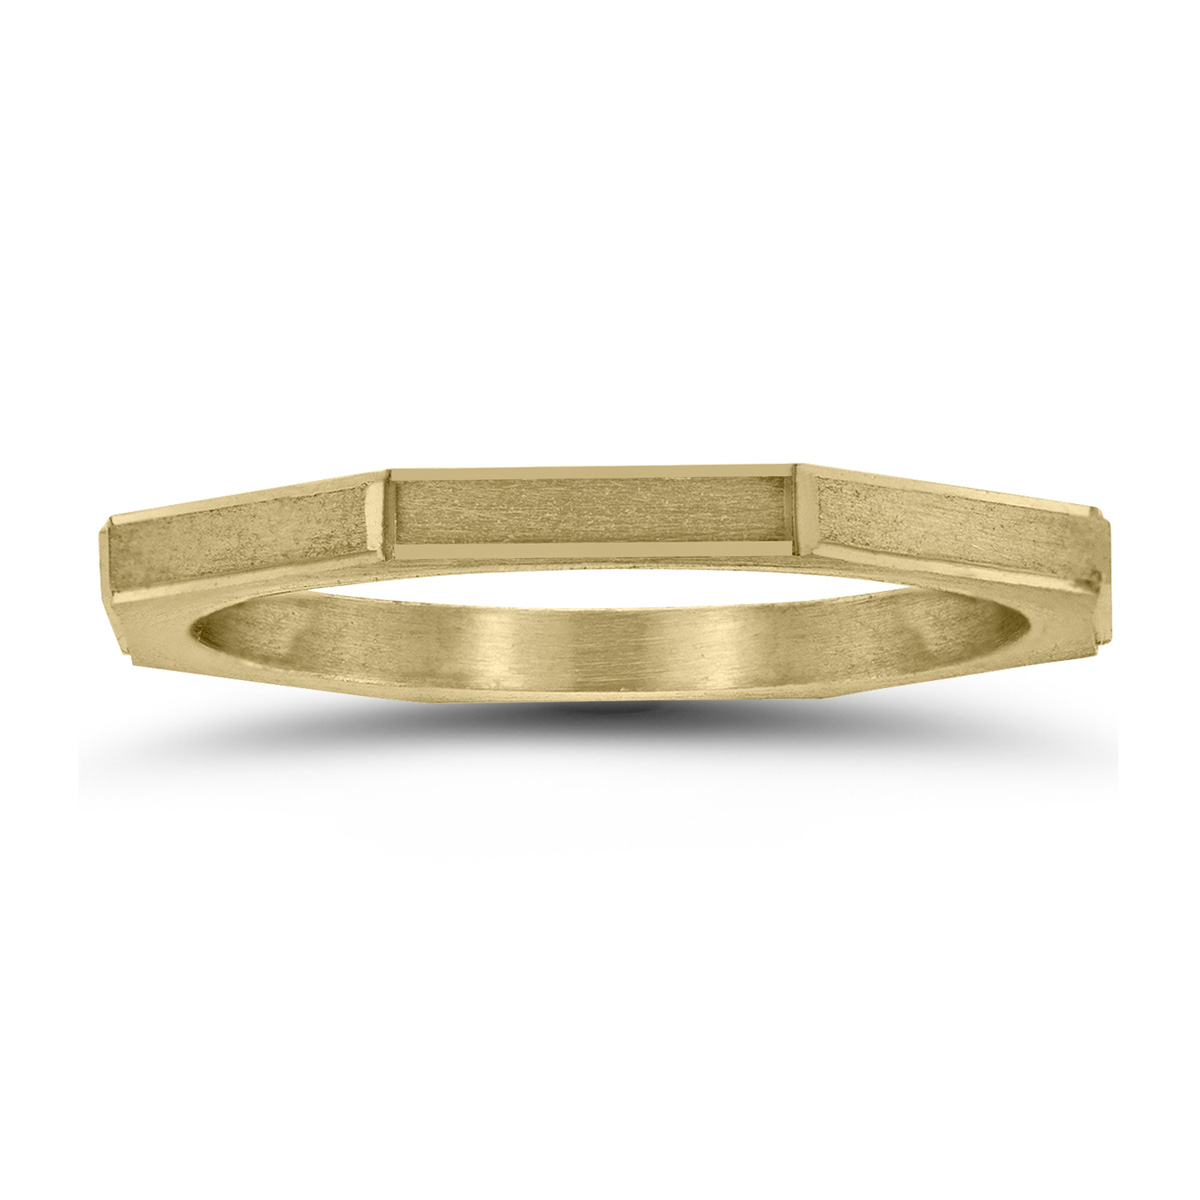 Eight Sided Thin 1.5MM Matte Finish Wedding Band in 14K Yellow Gold